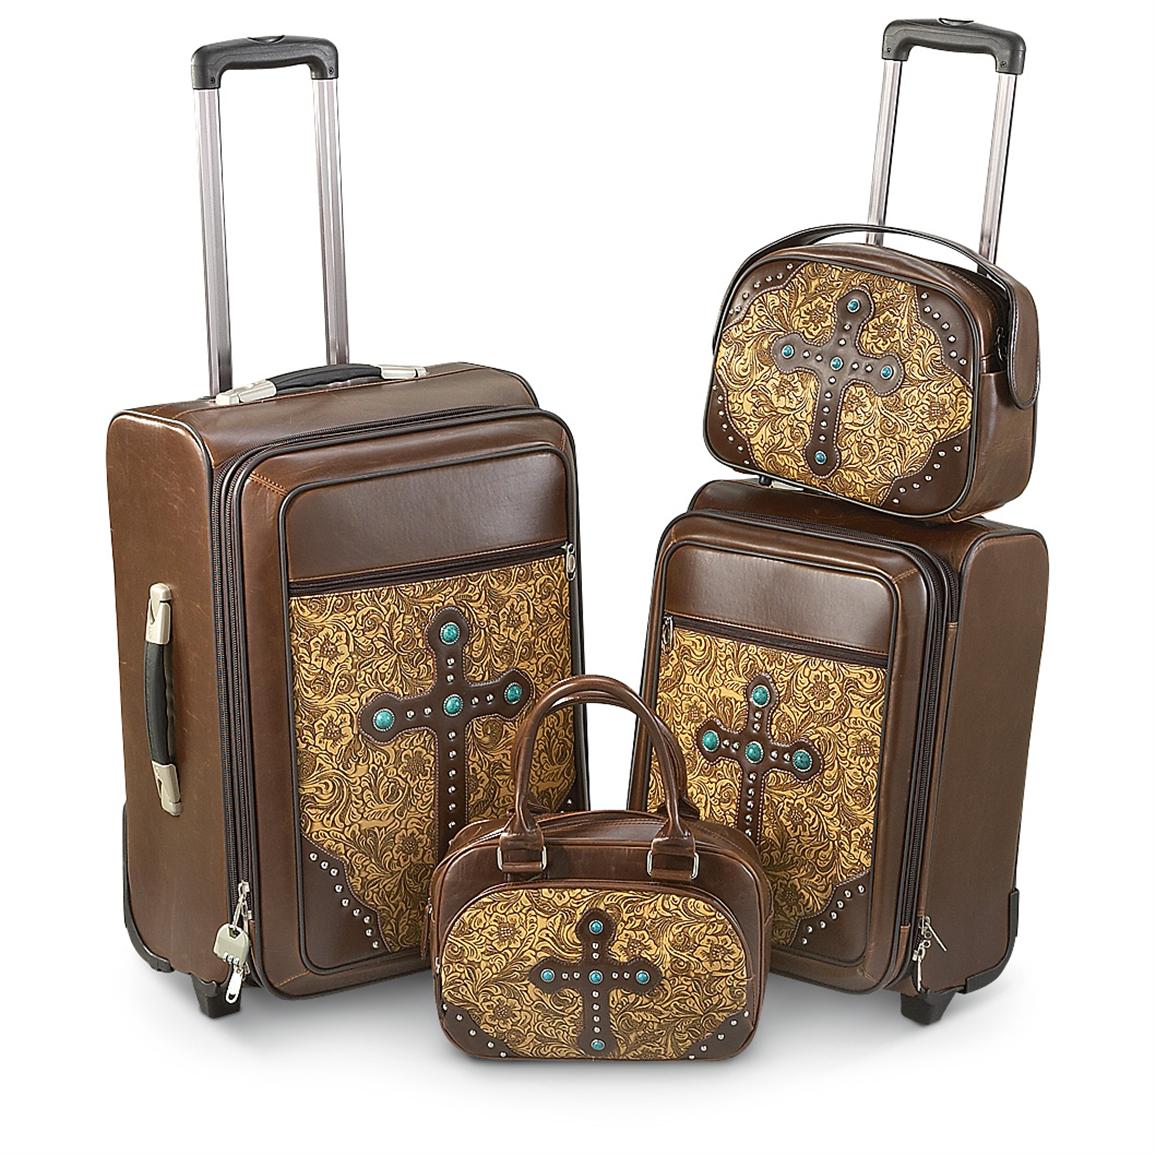 Western Cross 4 - Pc. Luggage Set, Brown - 214645, at Sportsman's Guide